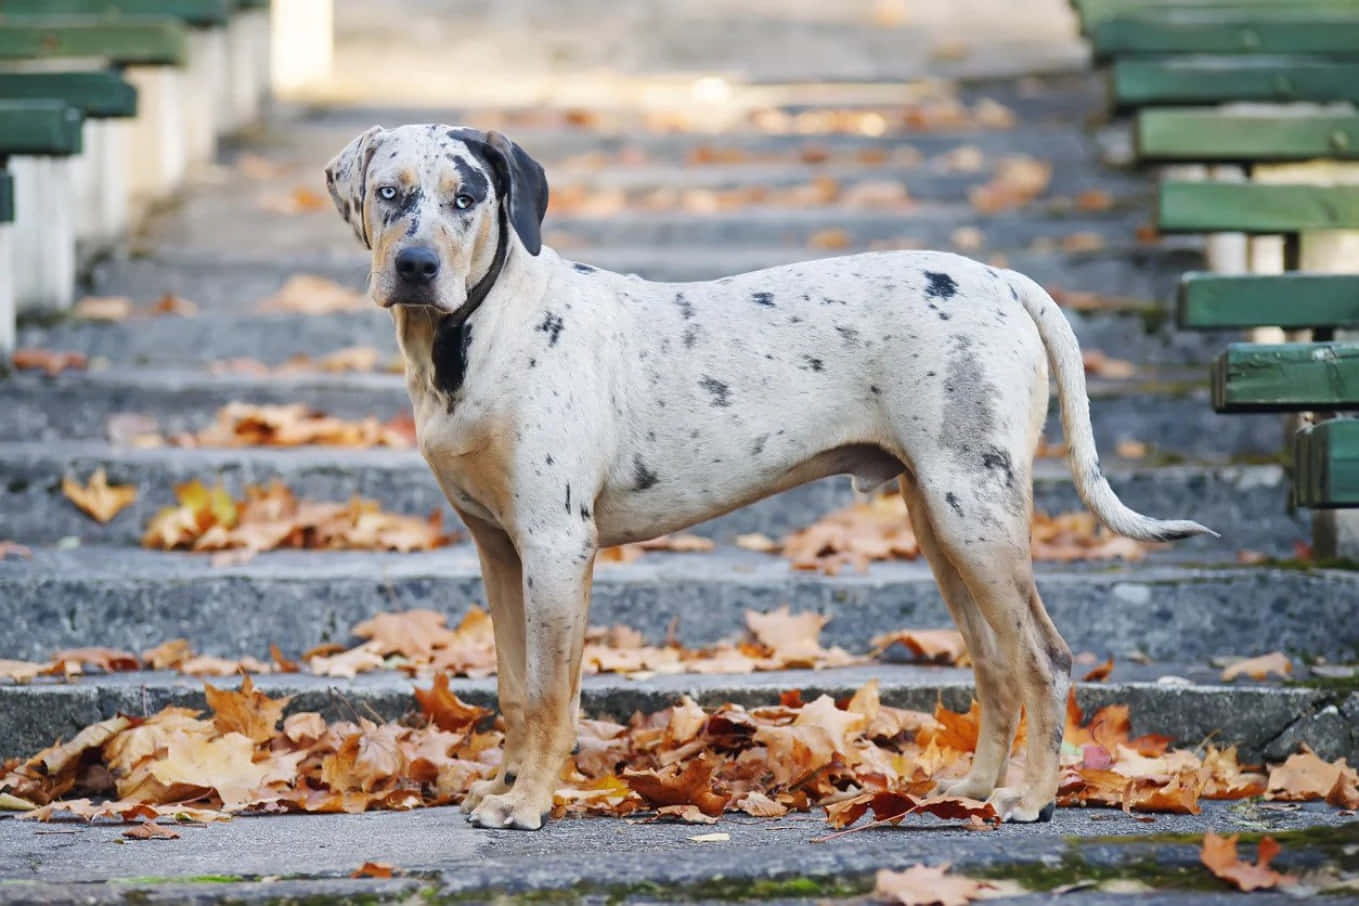 A Catahoula Leopard Dog full of energy and loyalty